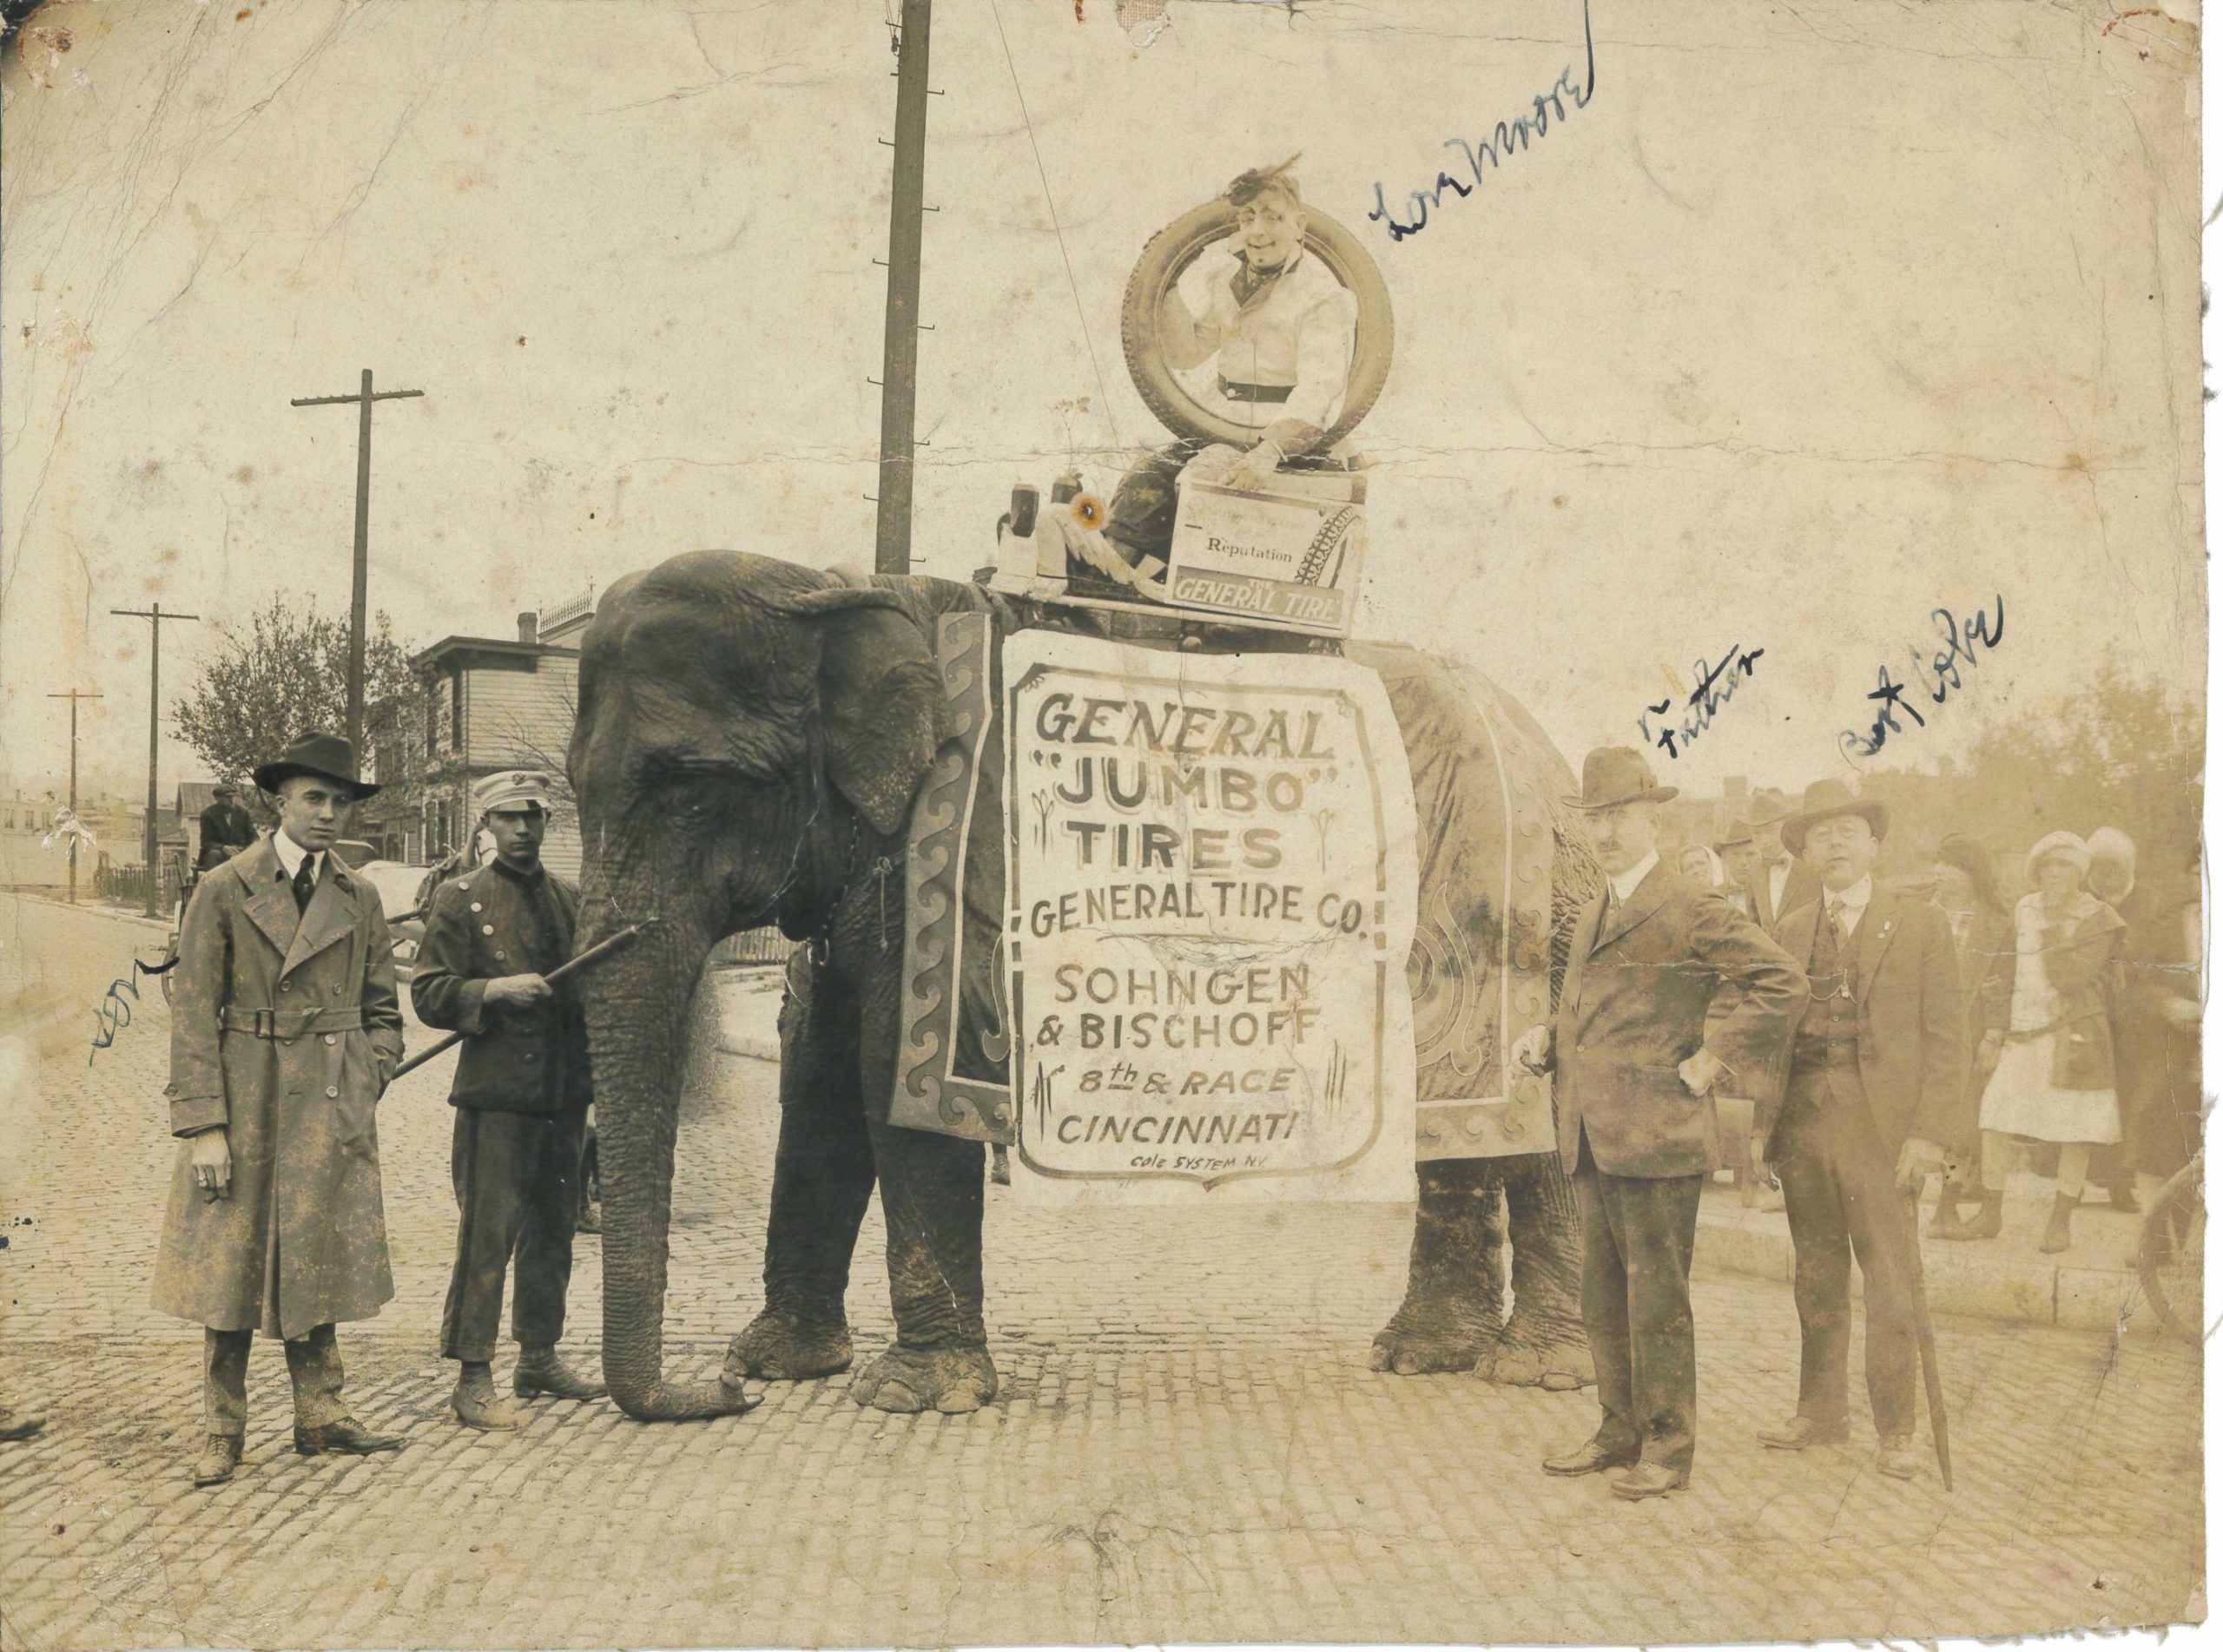 Black and white photograph featuring an elephant wearing a sign reading "General Jumbo Tires, General Tire, Co." A clown, holding a car tire, rides the elephant. The elephant is posed on a paved street with houses in the background and several men in suits standing to the side. 